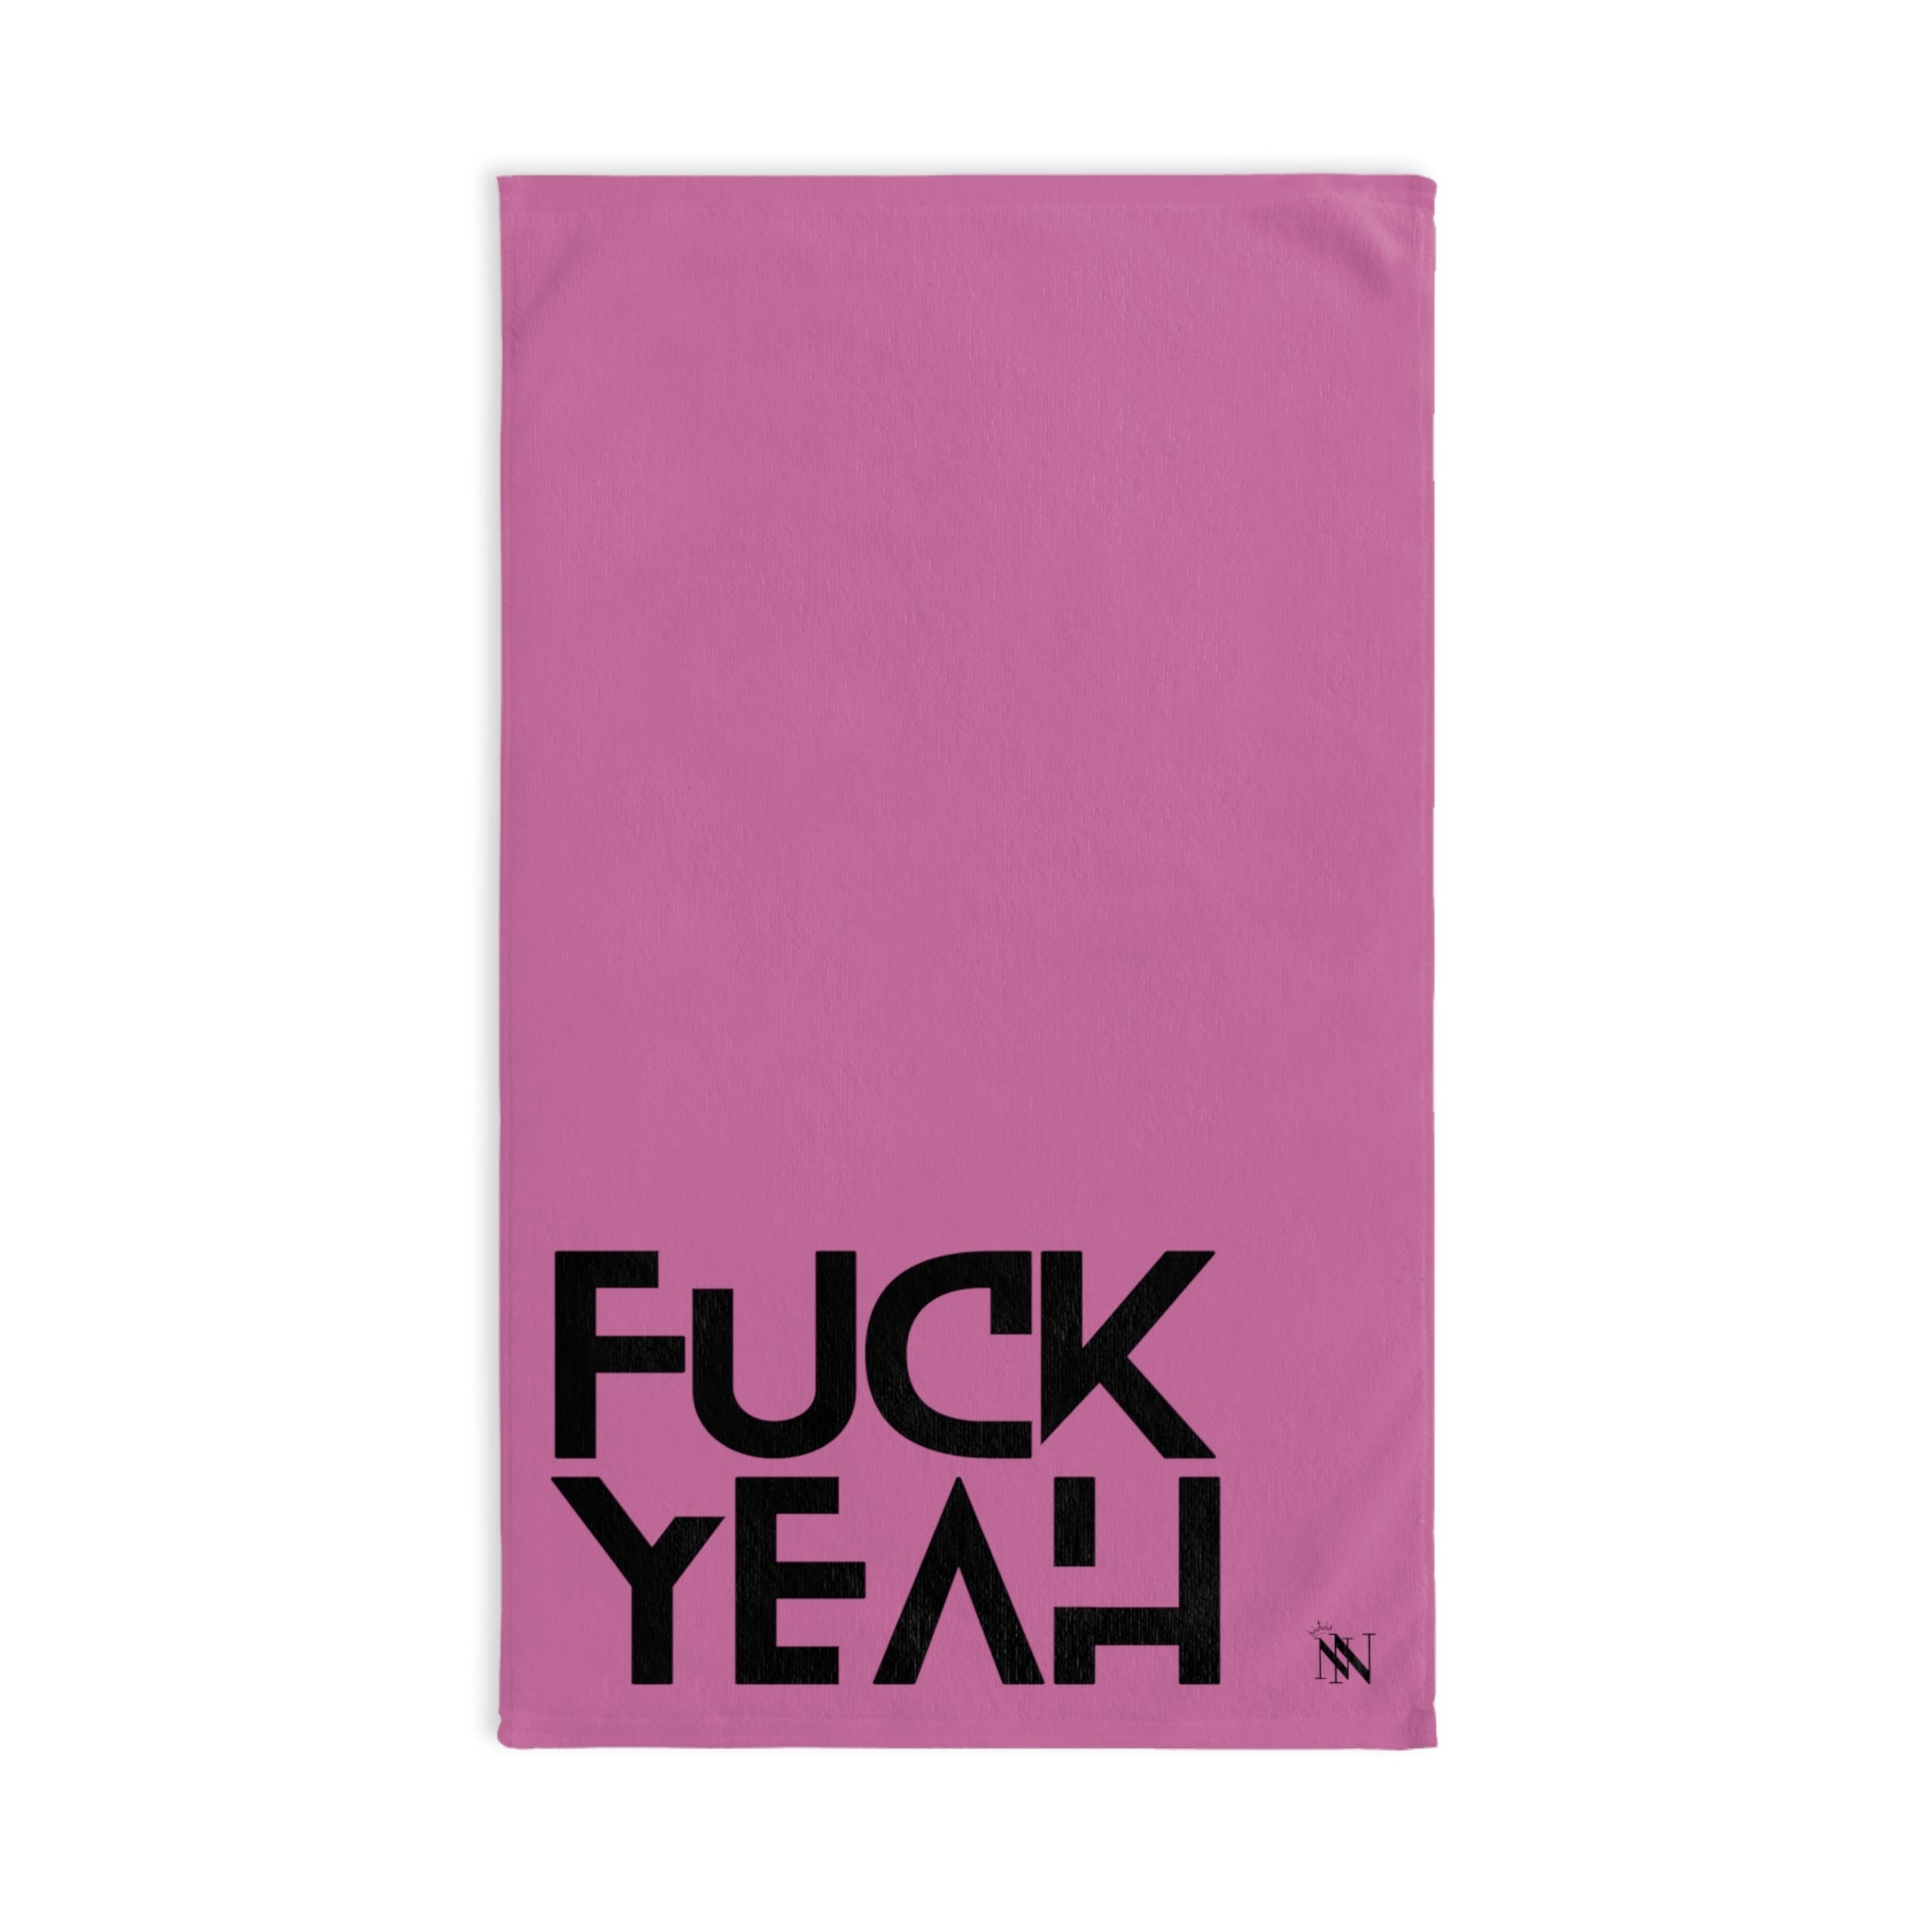 Yeah F*ck YesPink | Novelty Gifts for Boyfriend, Funny Towel Romantic Gift for Wedding Couple Fiance First Year Anniversary Valentines, Party Gag Gifts, Joke Humor Cloth for Husband Men BF NECTAR NAPKINS